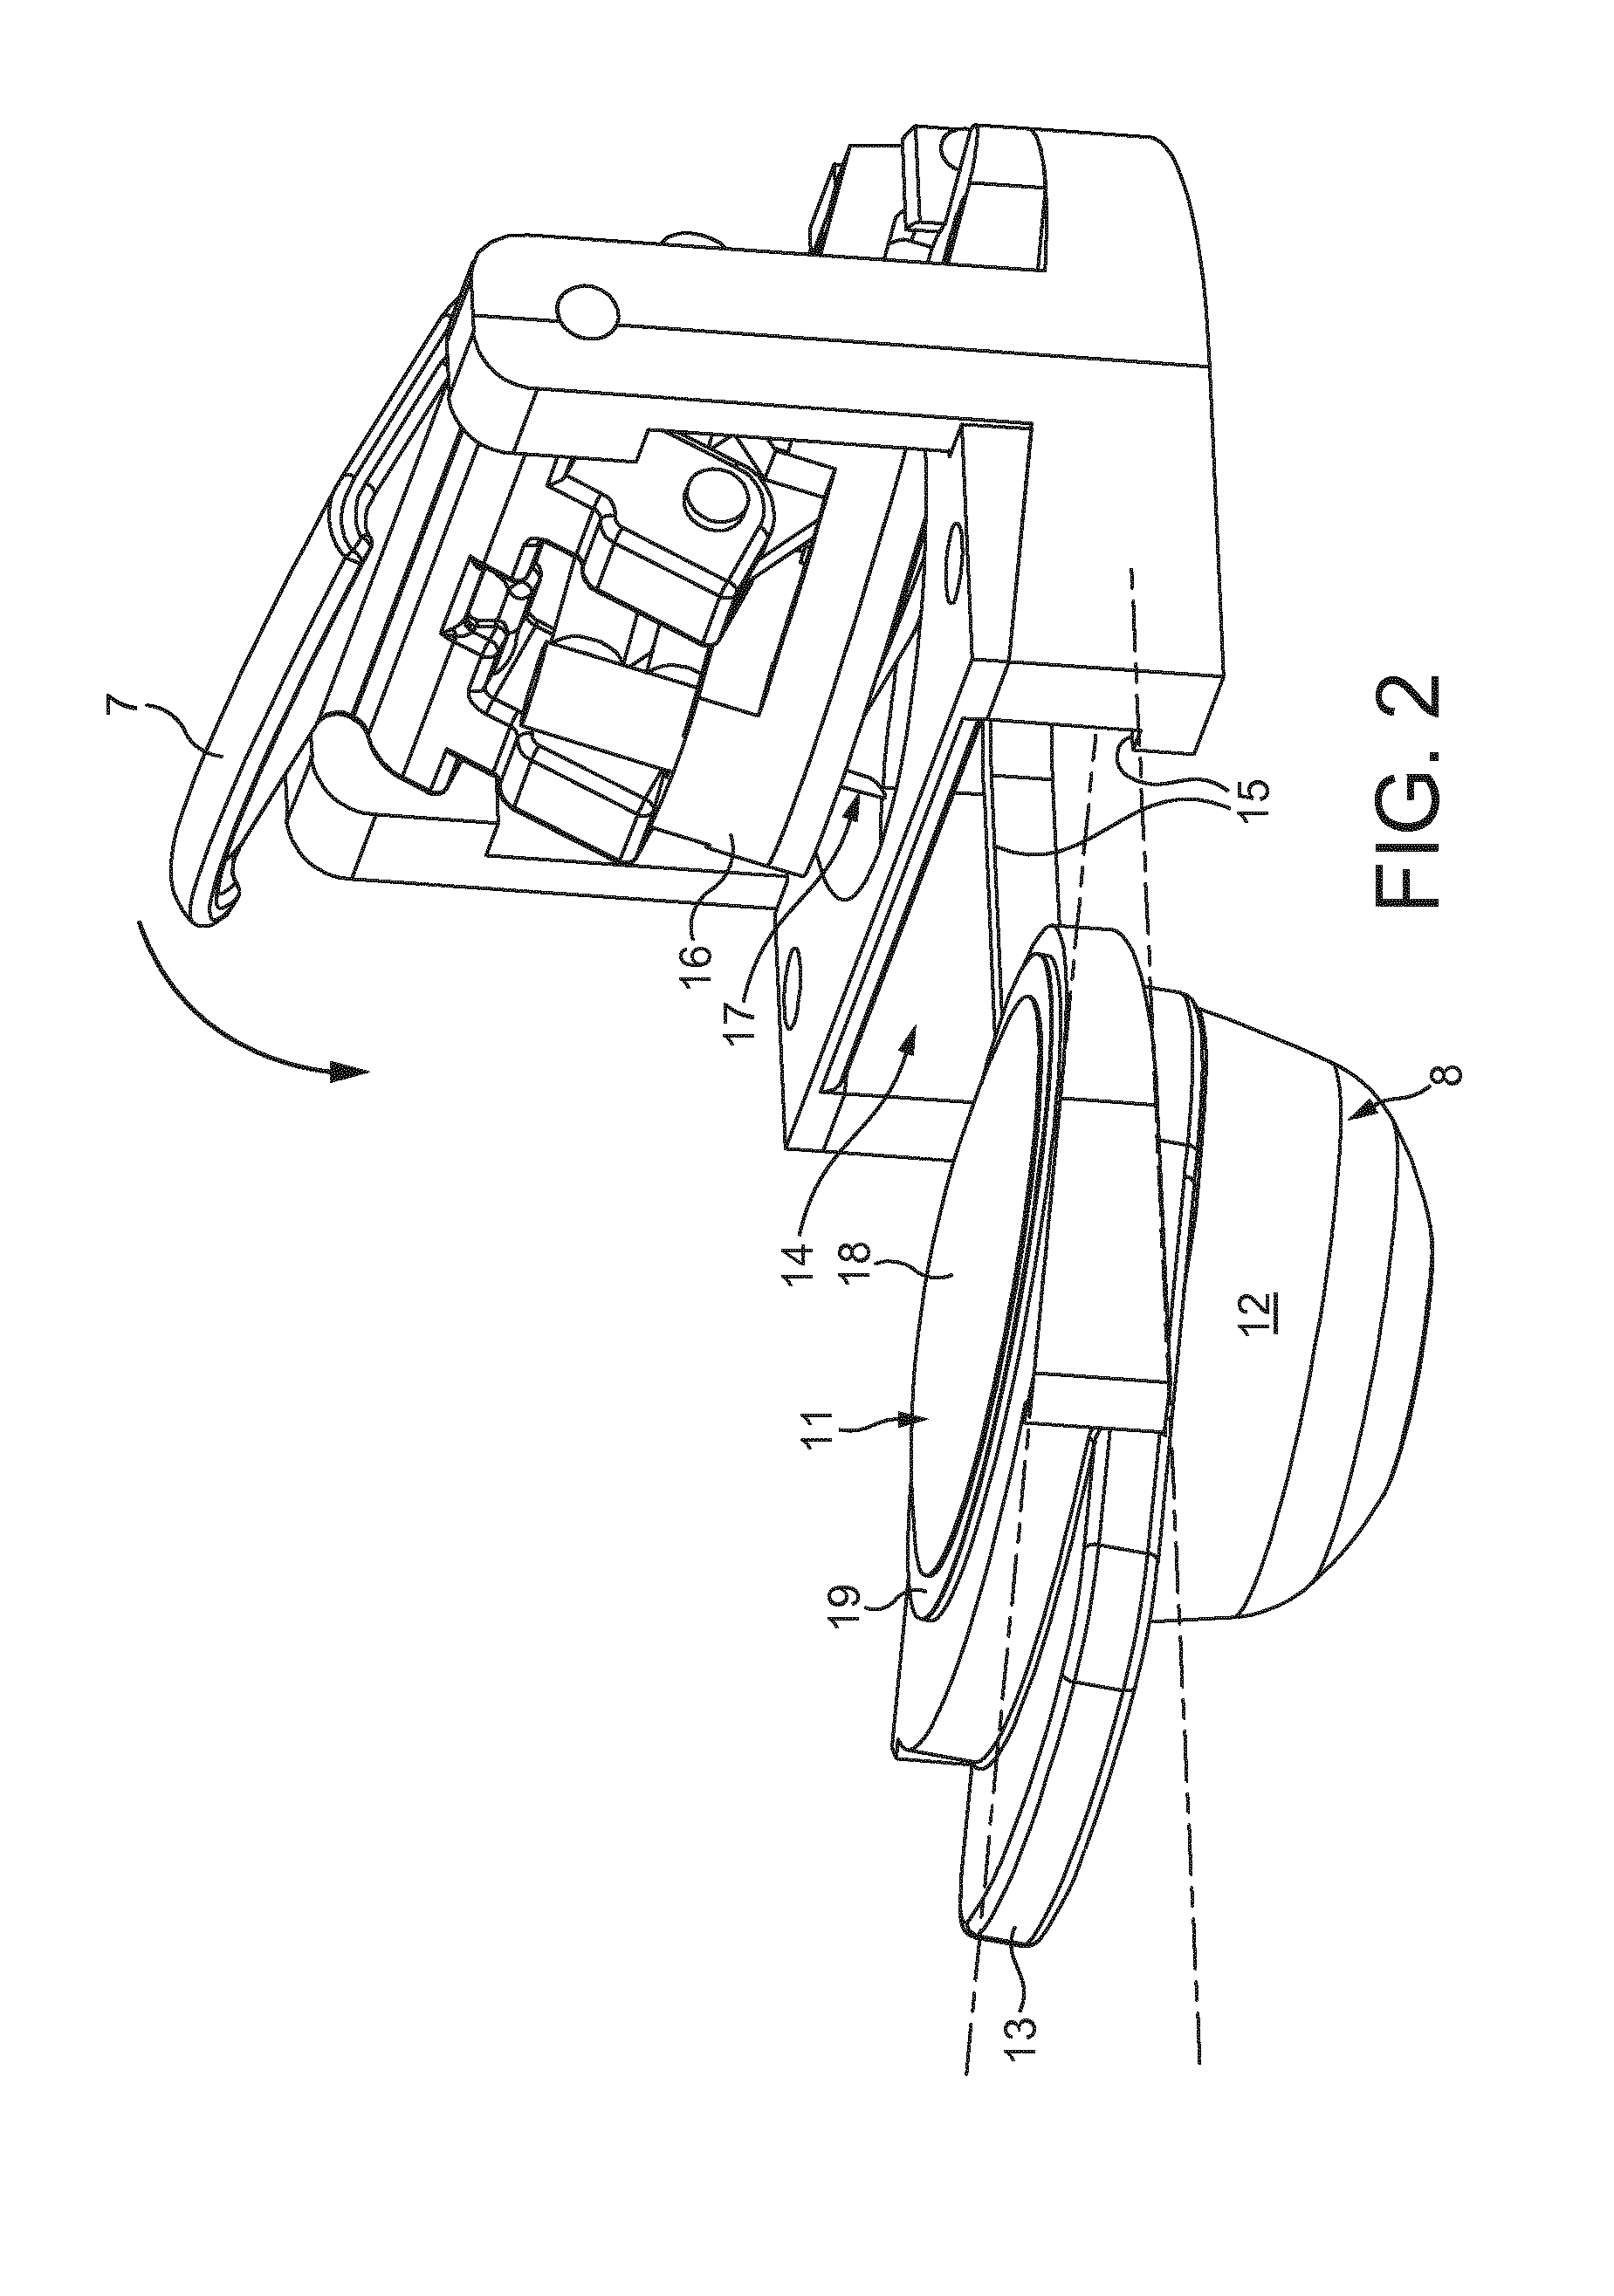 Beverage capsule with Anti-dripping membrane